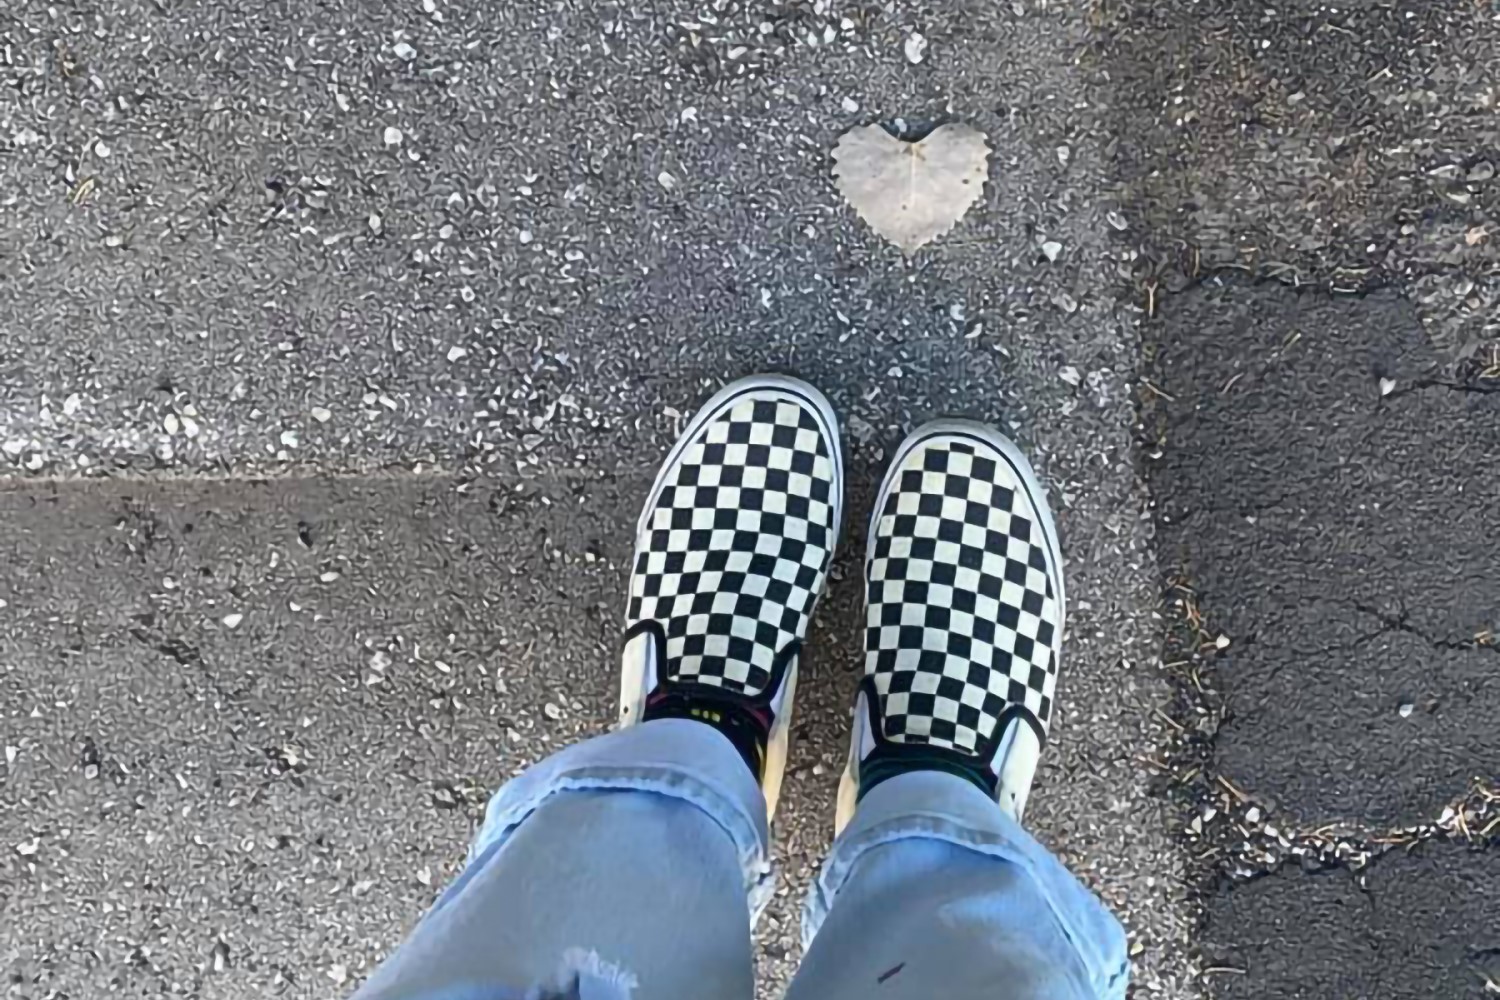 Image of sneakers and a heart